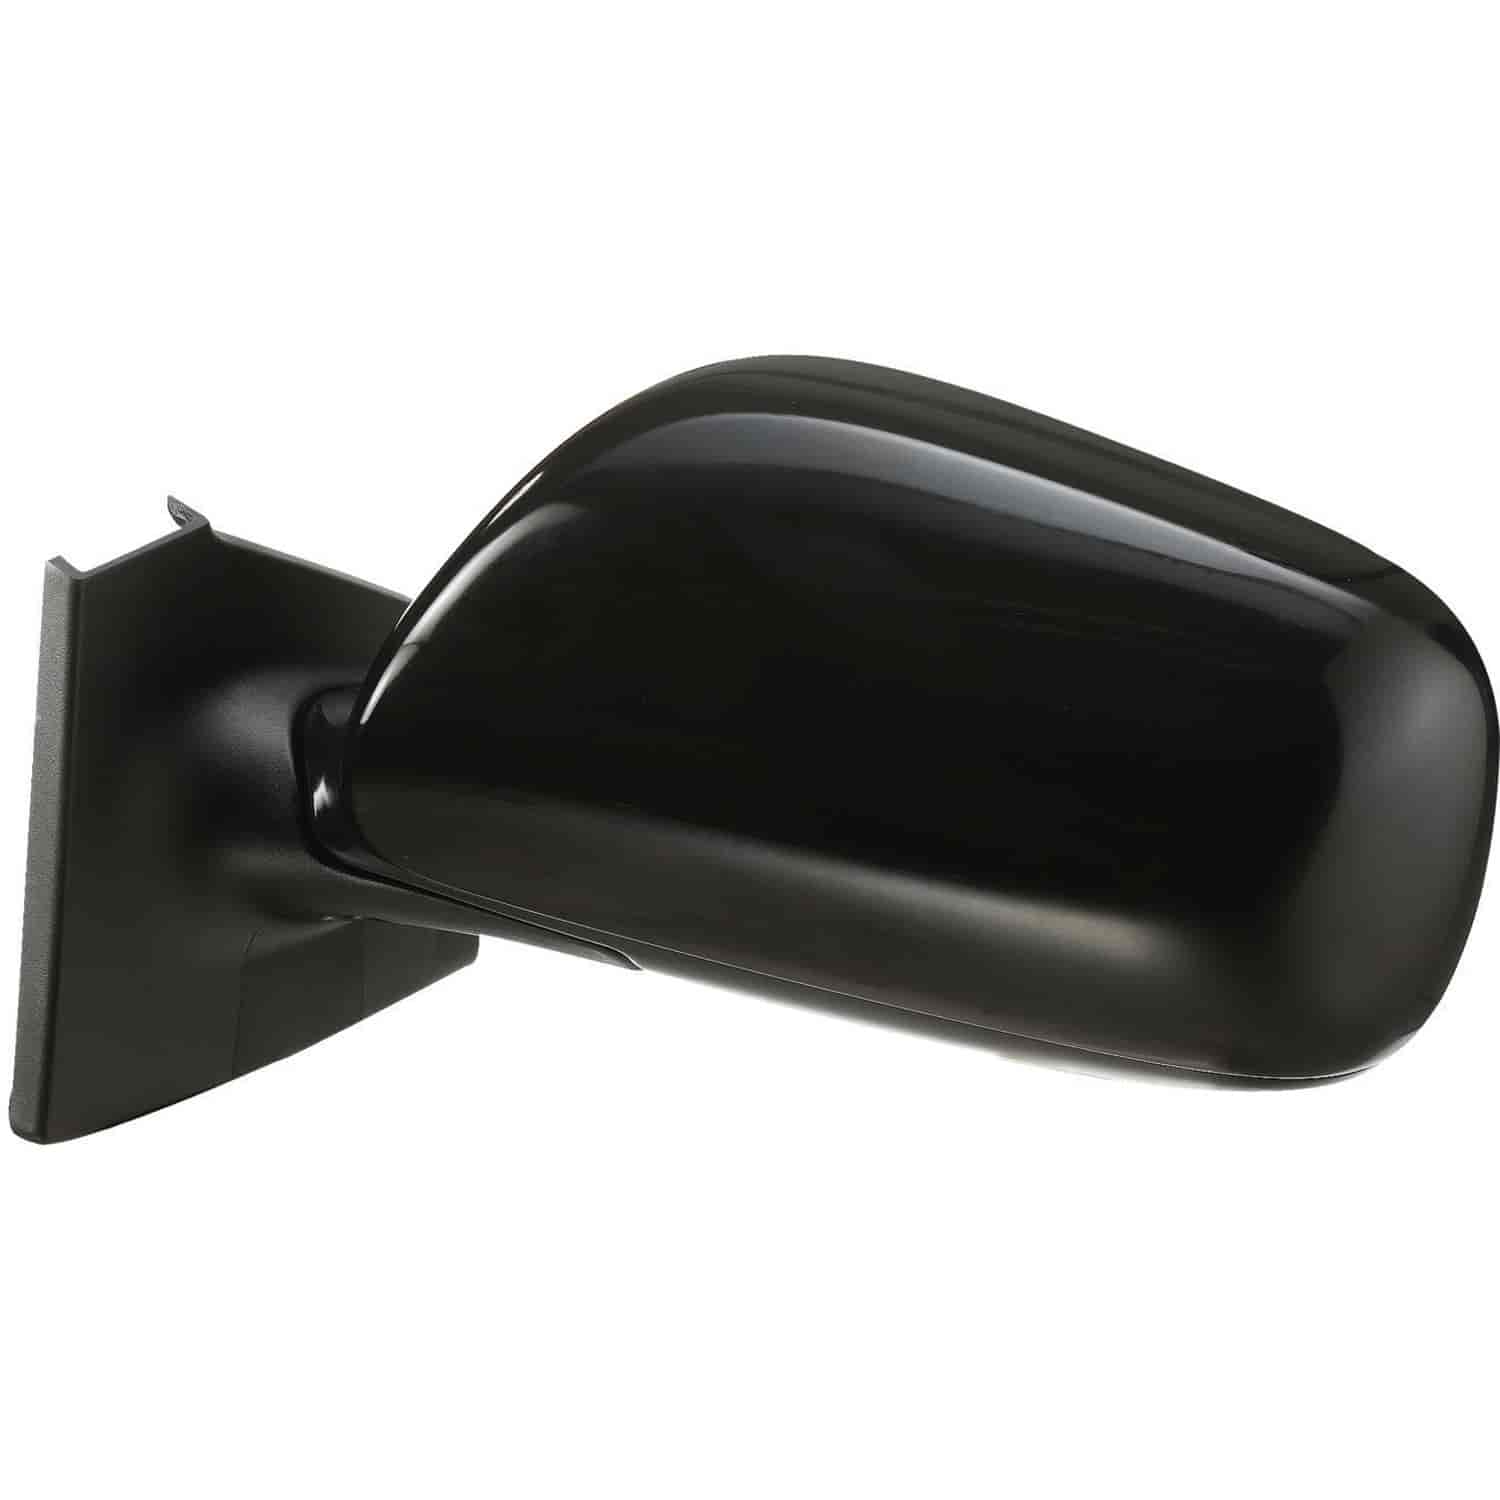 OEM Style Replacement mirror for 07-11 Toyota Yaris Hatchback driver side mirror tested to fit and f